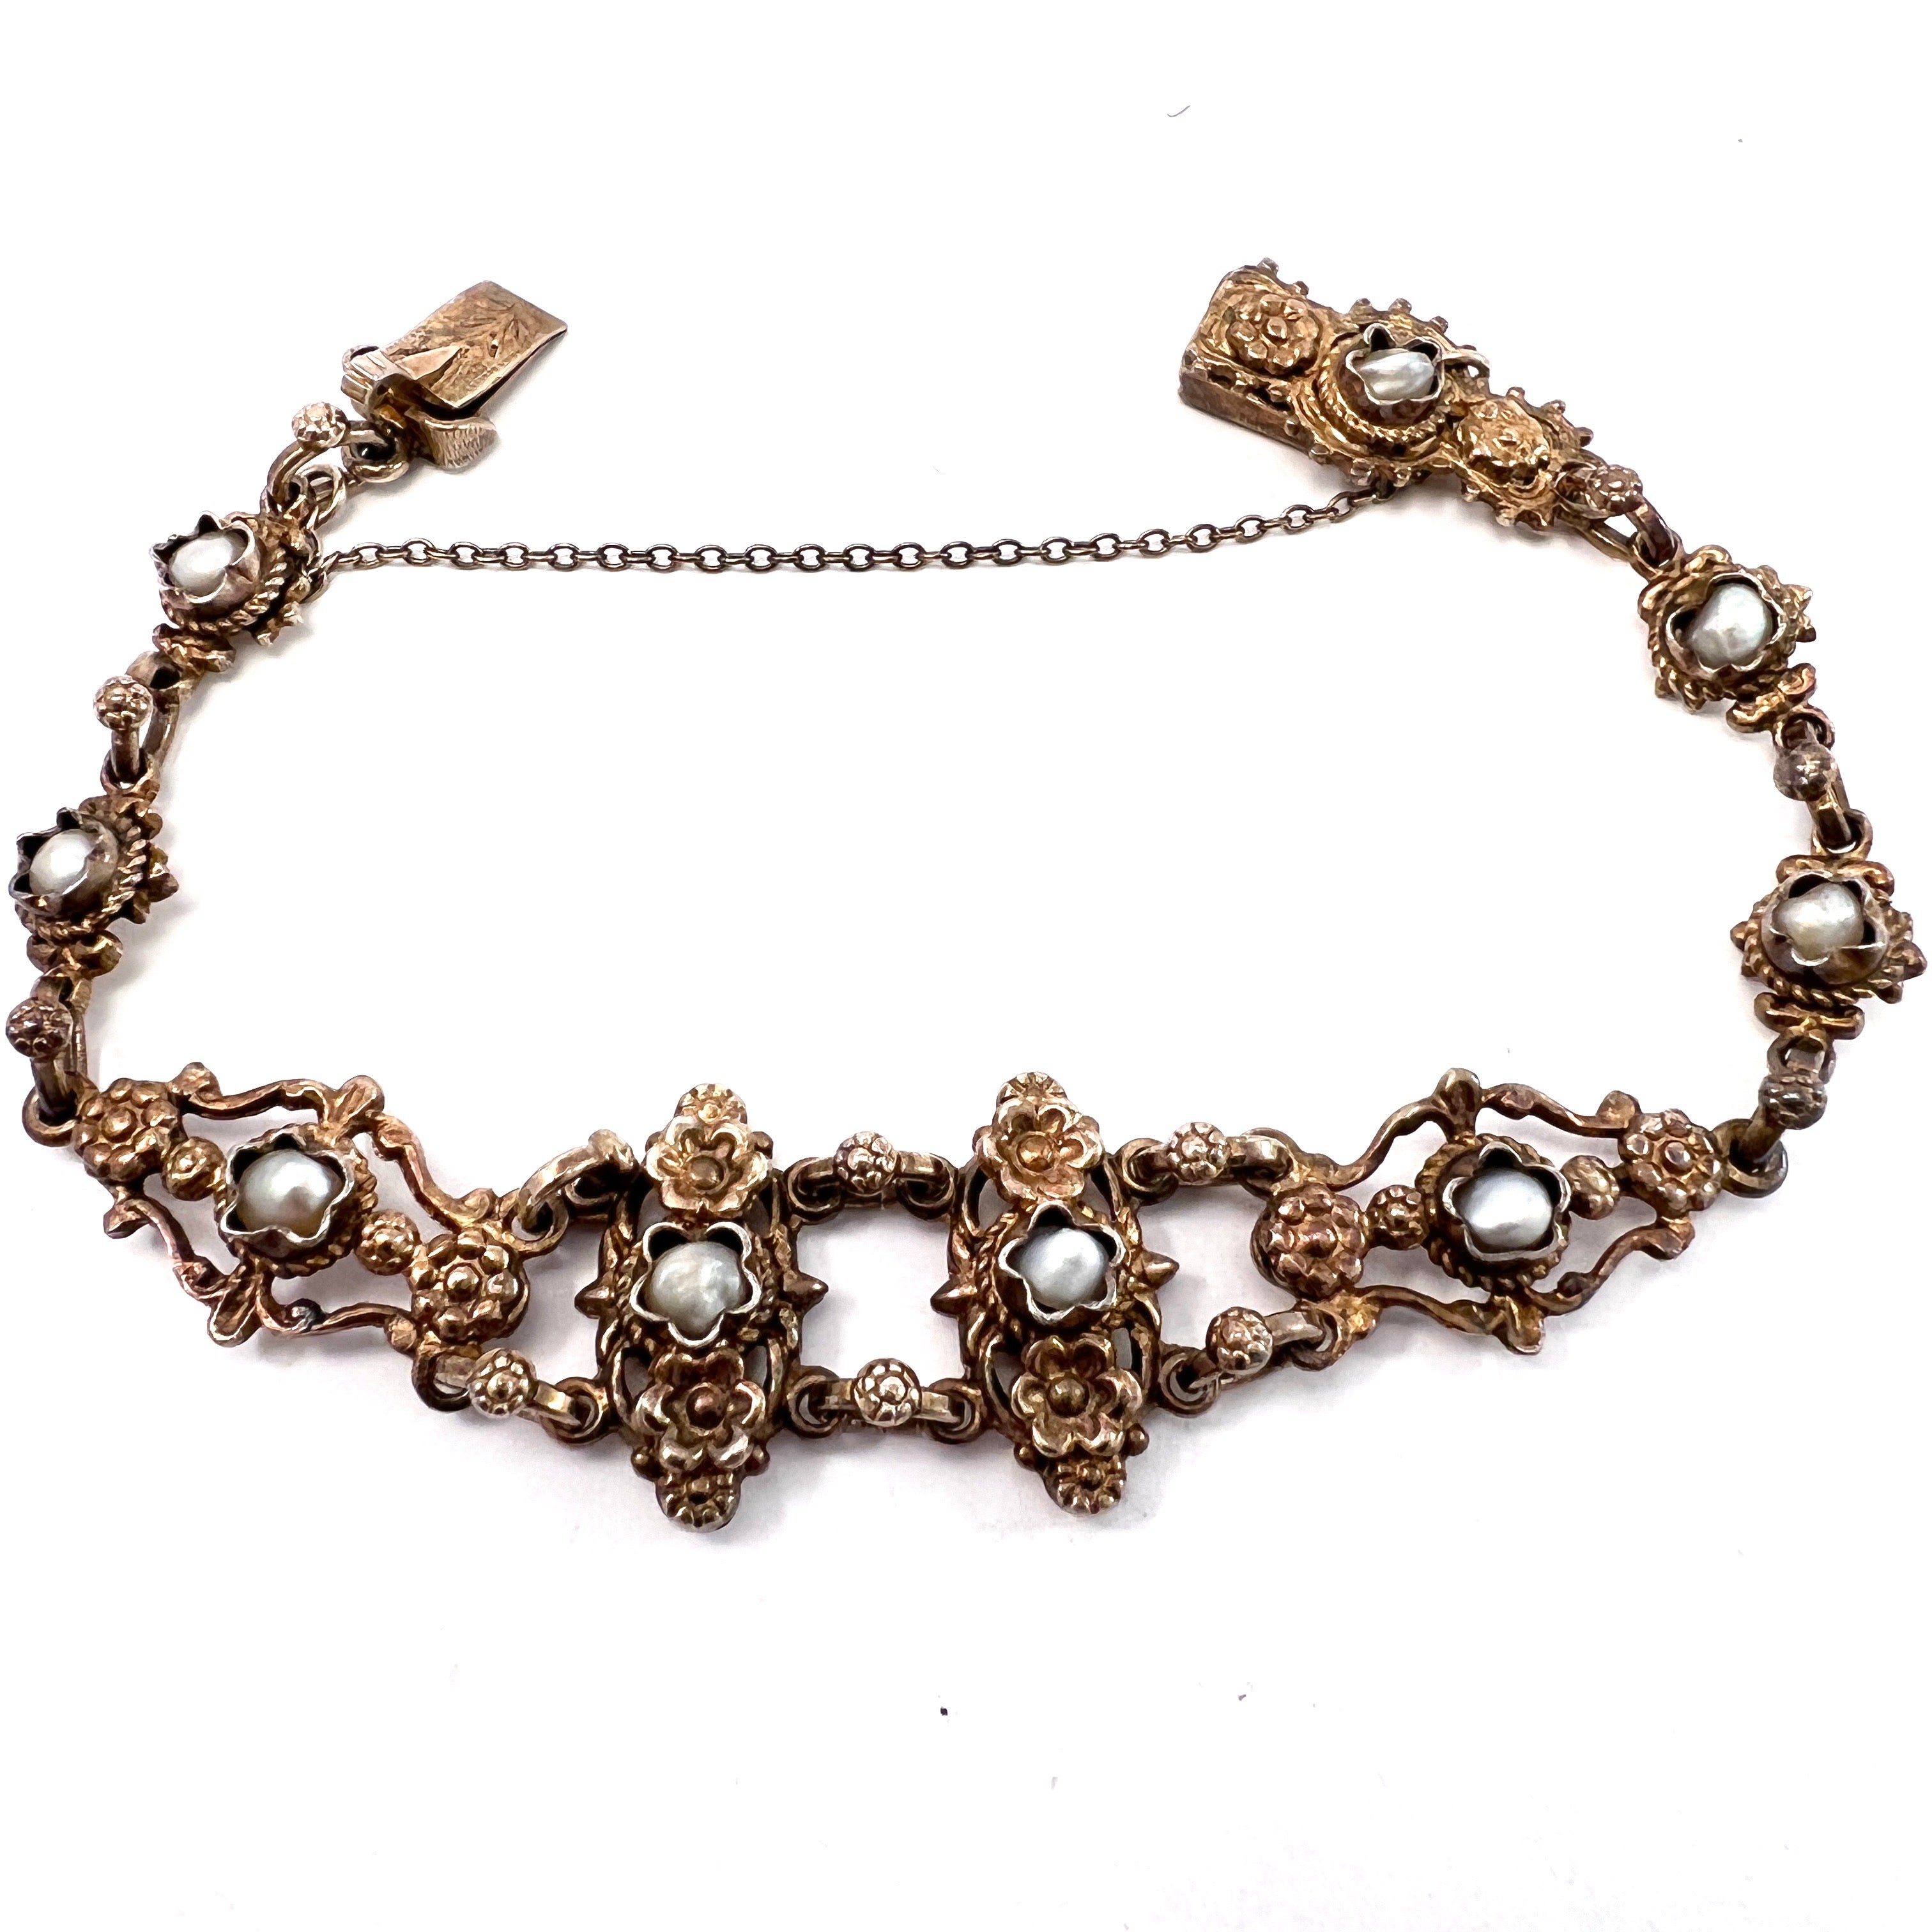 Antique Austro-Hungarian Arts and Crafts Silver Pearl Bracelet.